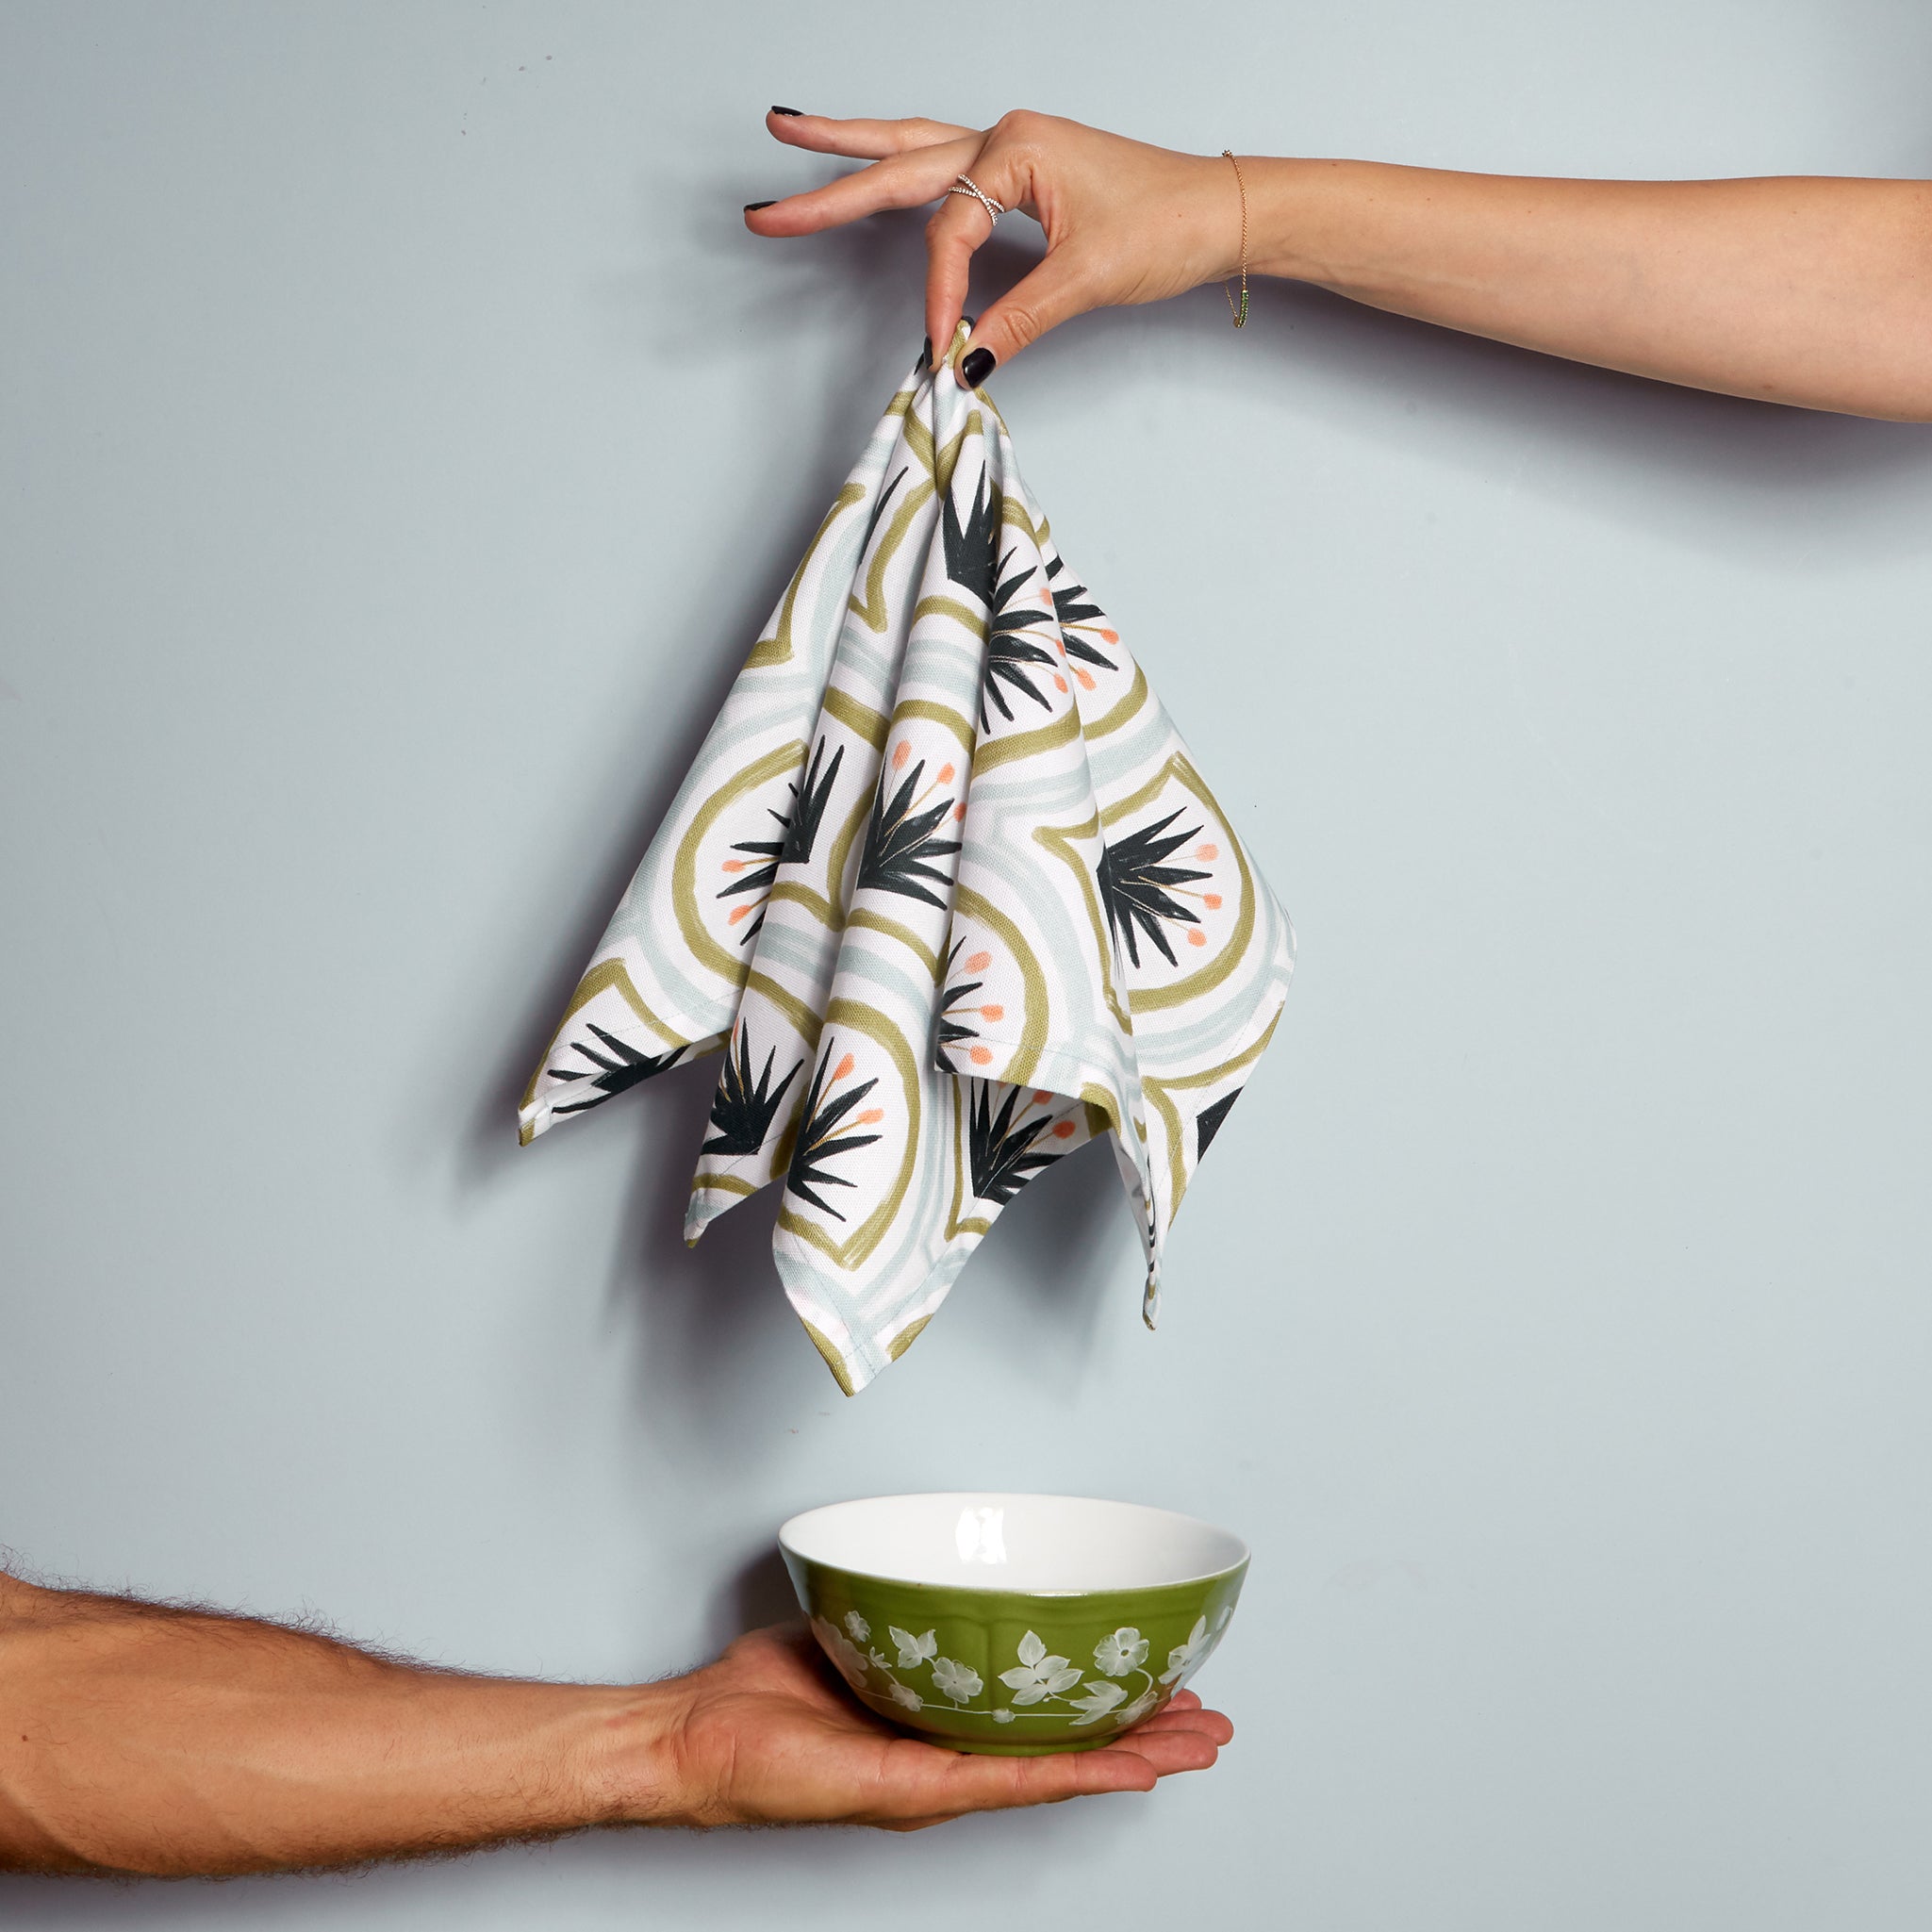 Art Deco Palm Pattern Printed Napkin being held by hand on top of another hand holding green floral printed bowl